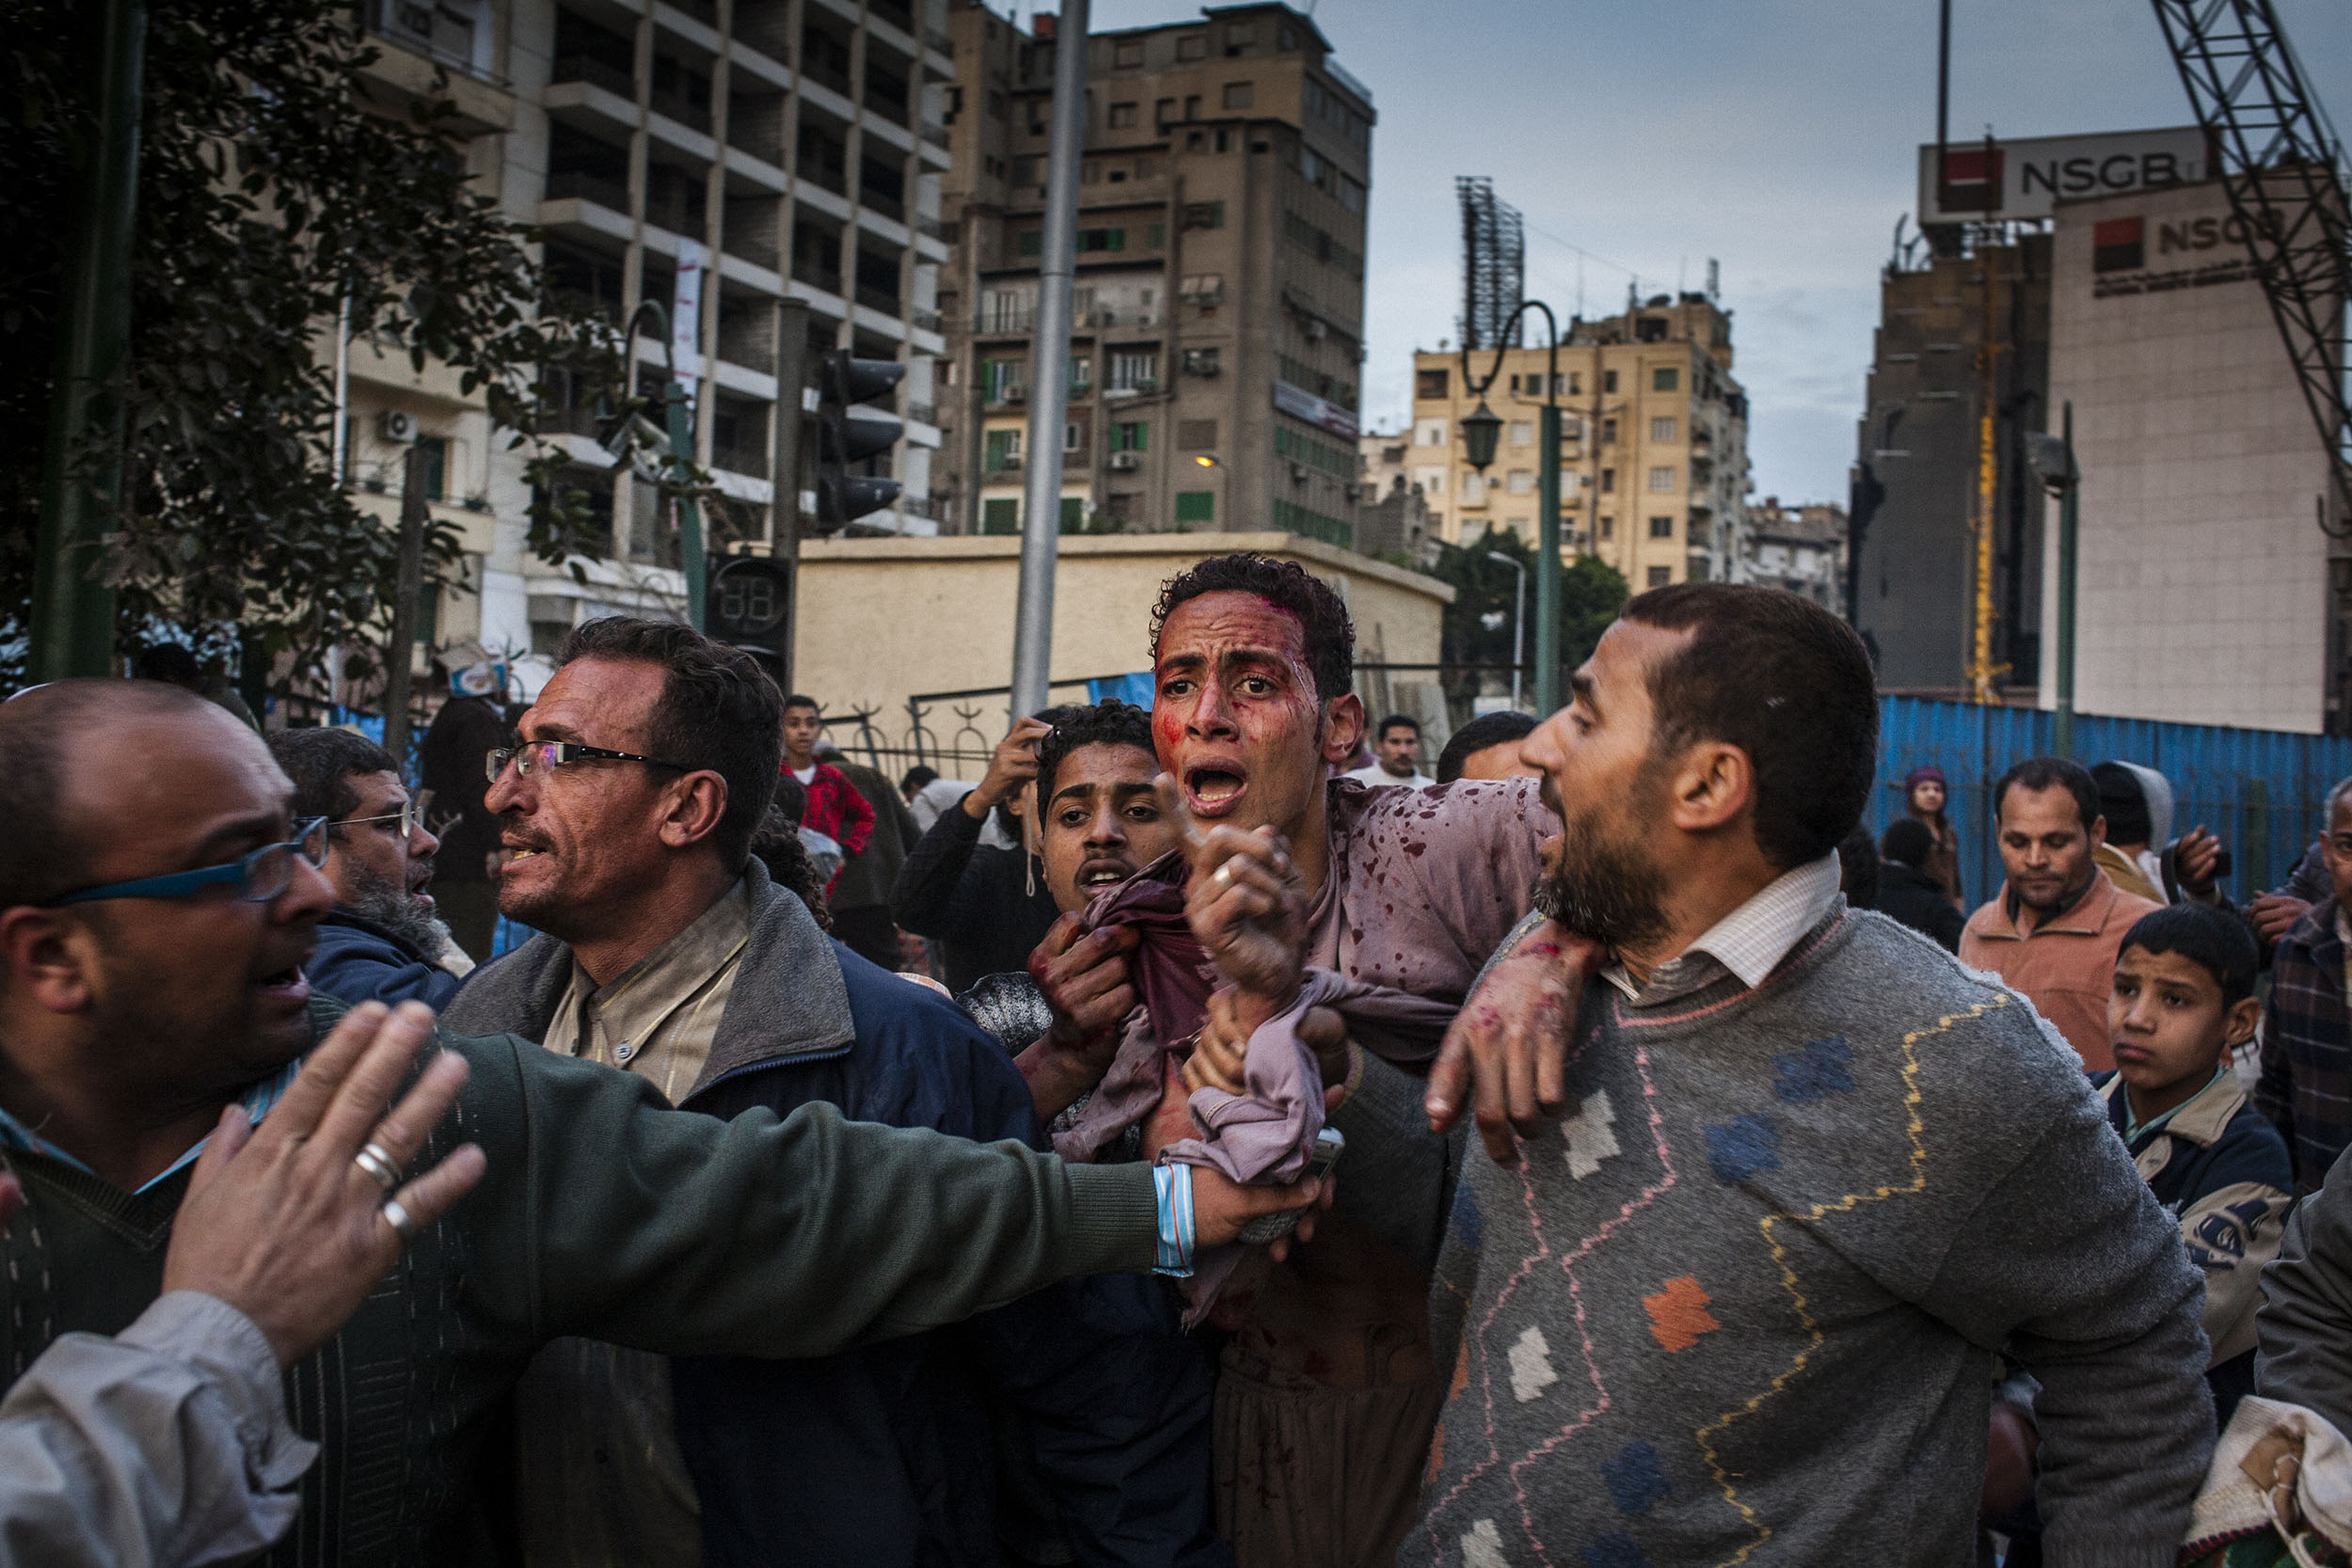  A young Mubarak supporter captured by anti-government protesters is beaten before being taken away outisde the Egyptian Museum in Tahrir Square.  